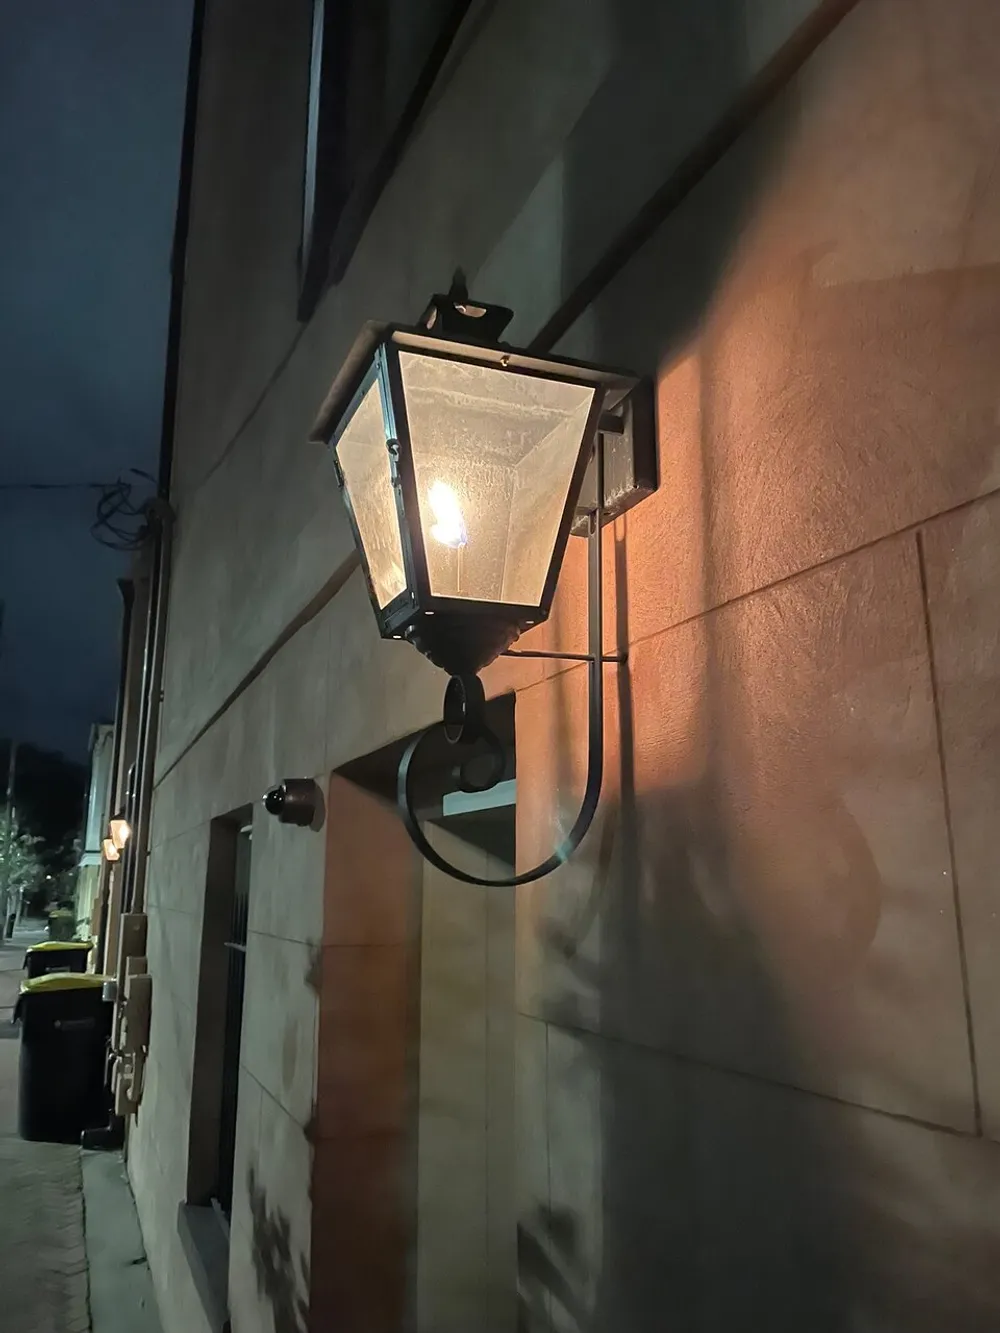 An illuminated lantern-style light fixture casts a warm glow on a buildings exterior wall at dusk